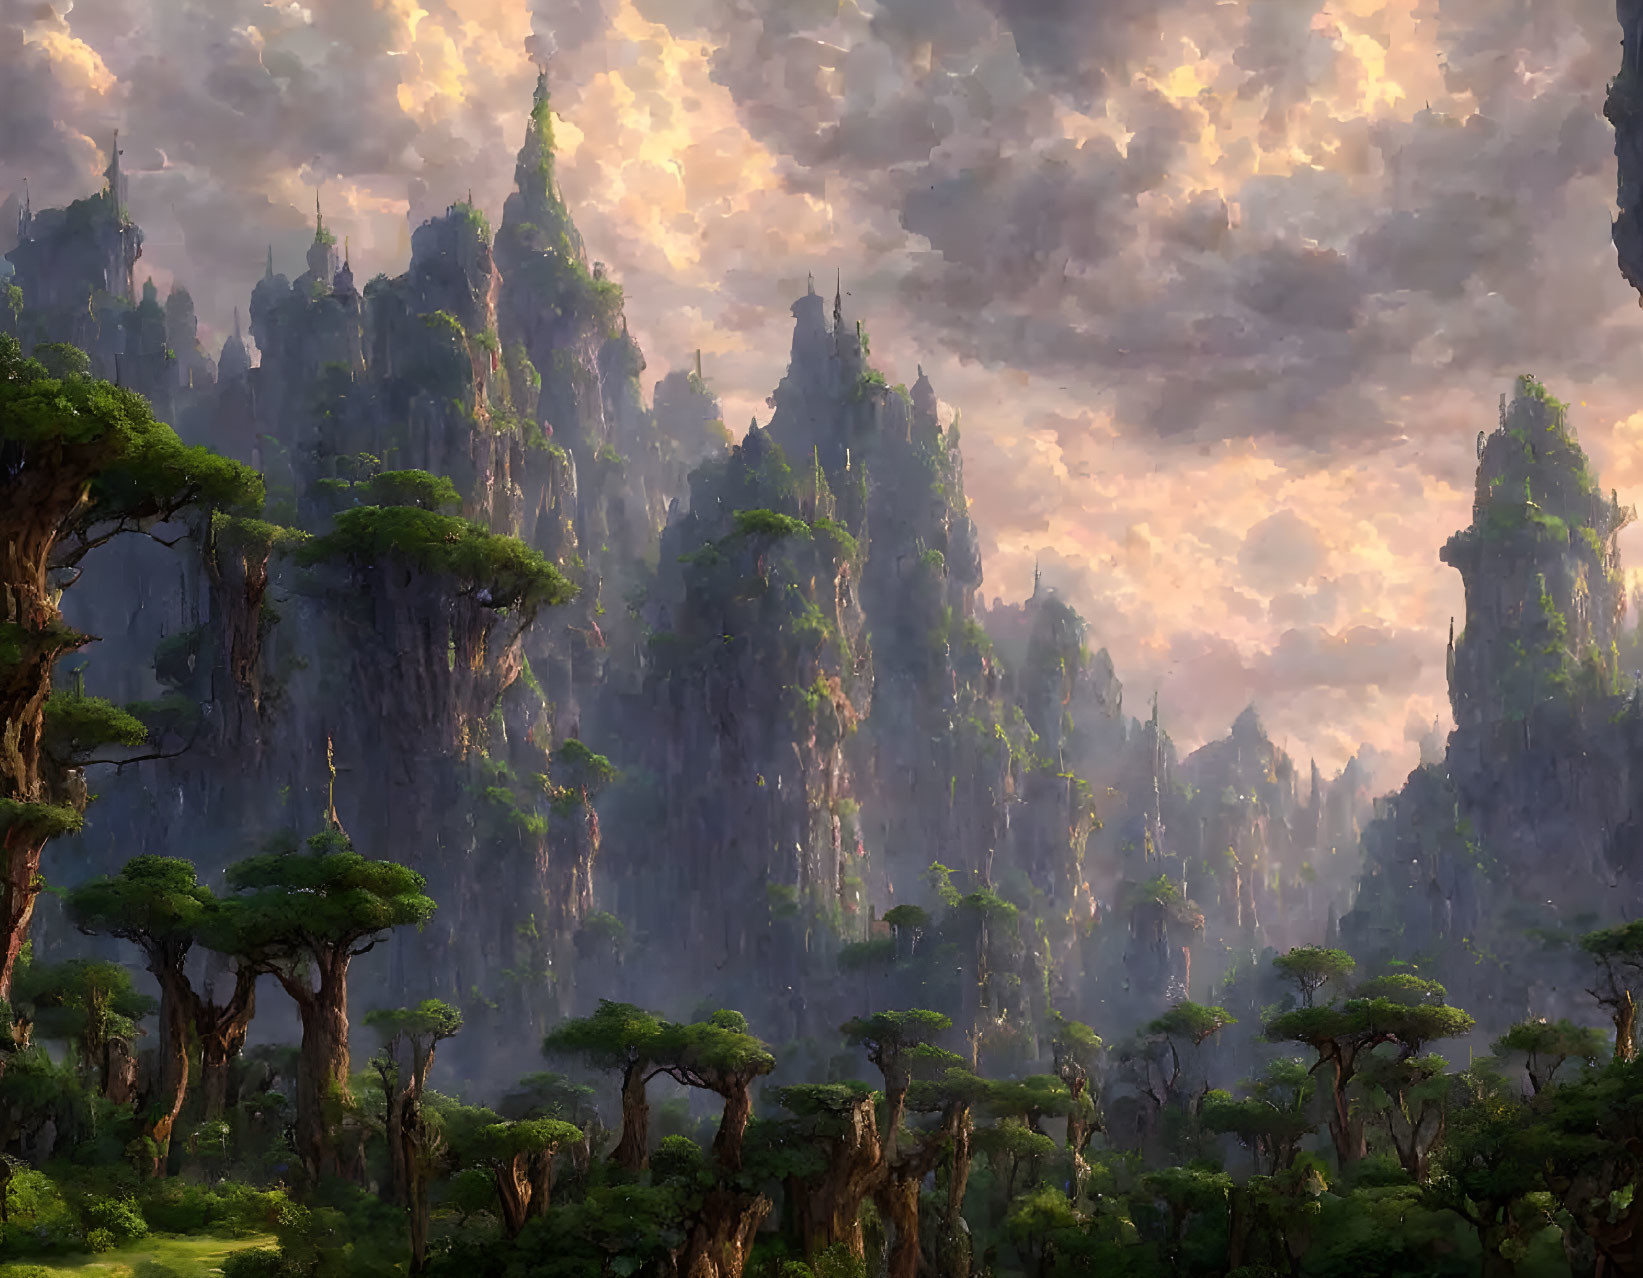 Fantasy landscape with towering tree-covered rock pillars under dramatic cloudy sky